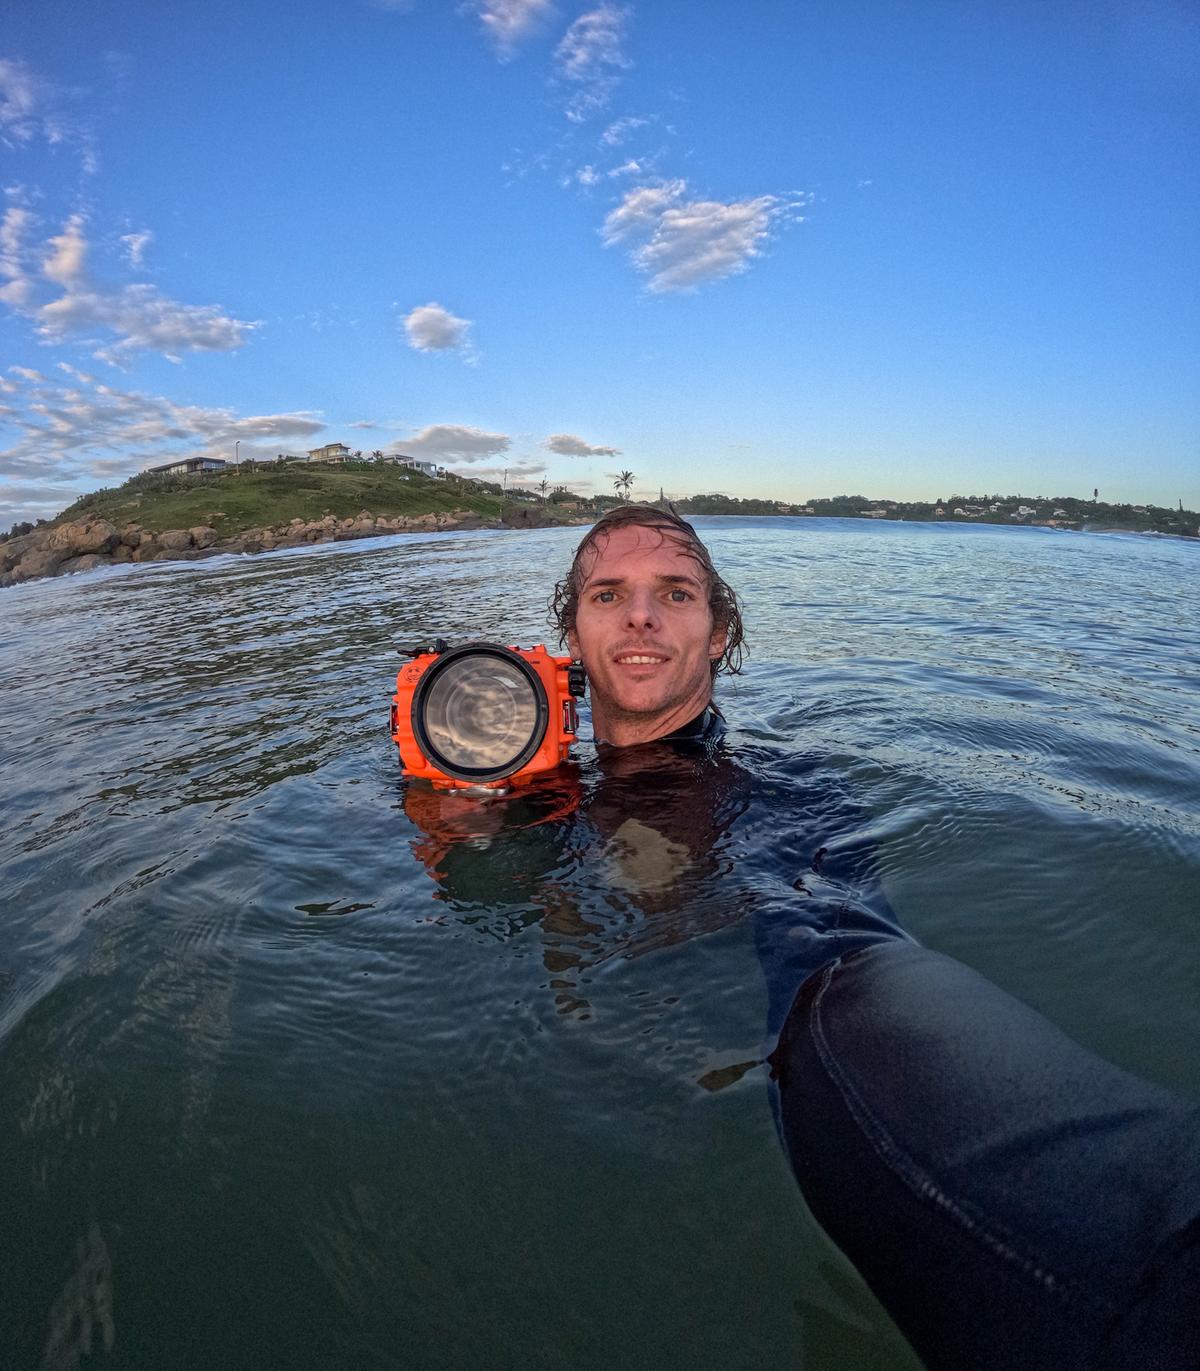 A selfie of marine photographer Terence Pieters. (Courtesy of <a href="https://www.instagram.com/orangerocks.za/">Terence Pieters</a>)